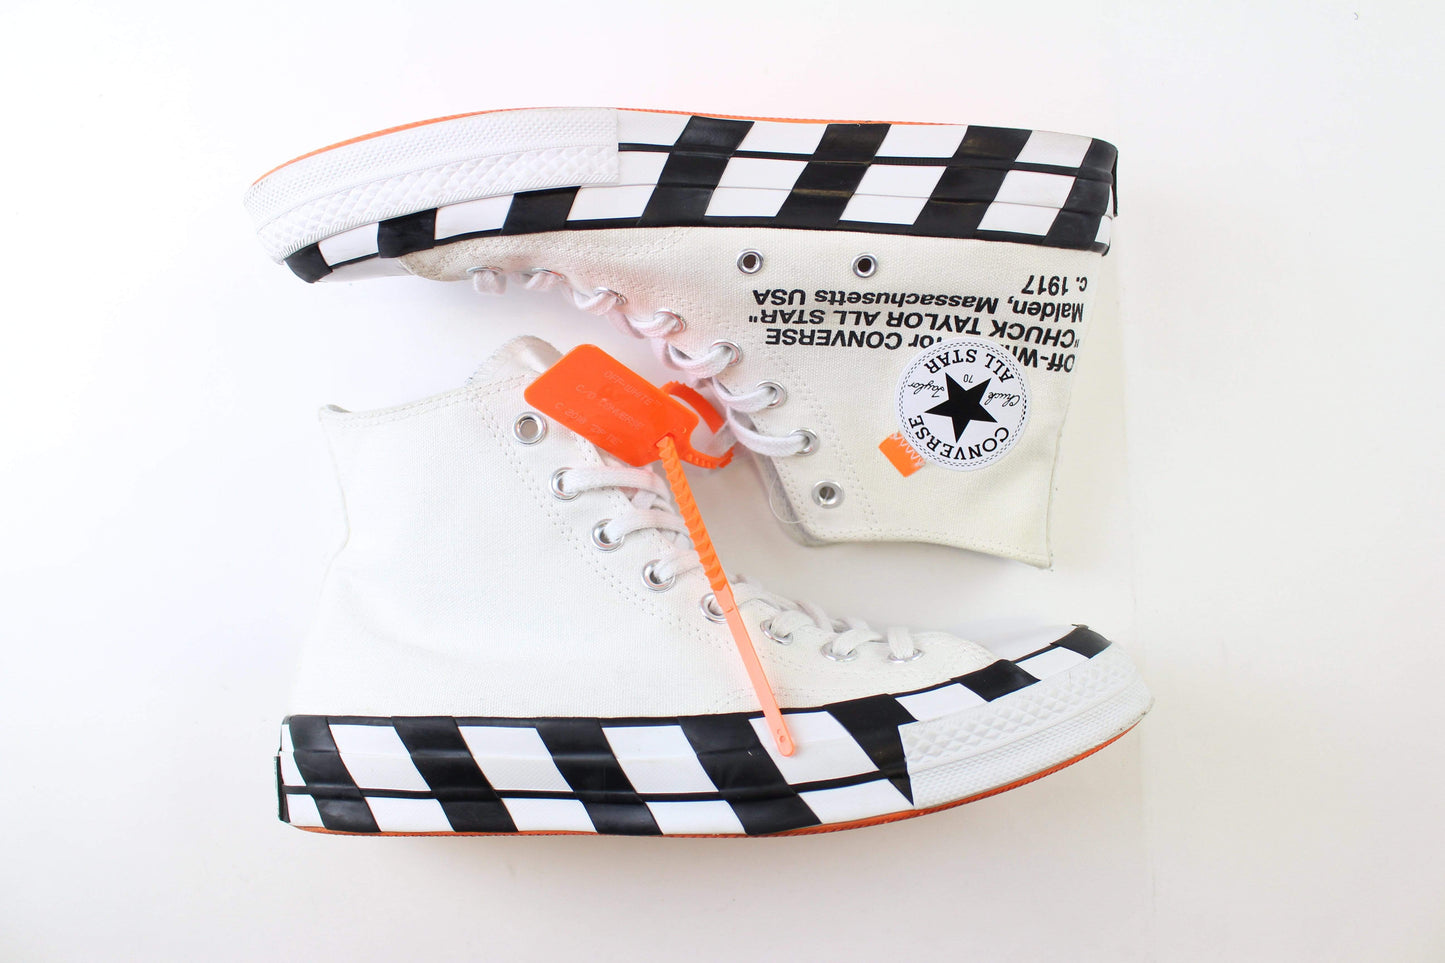 Converse x OffWhite Chuck Taylors - SaruGeneral